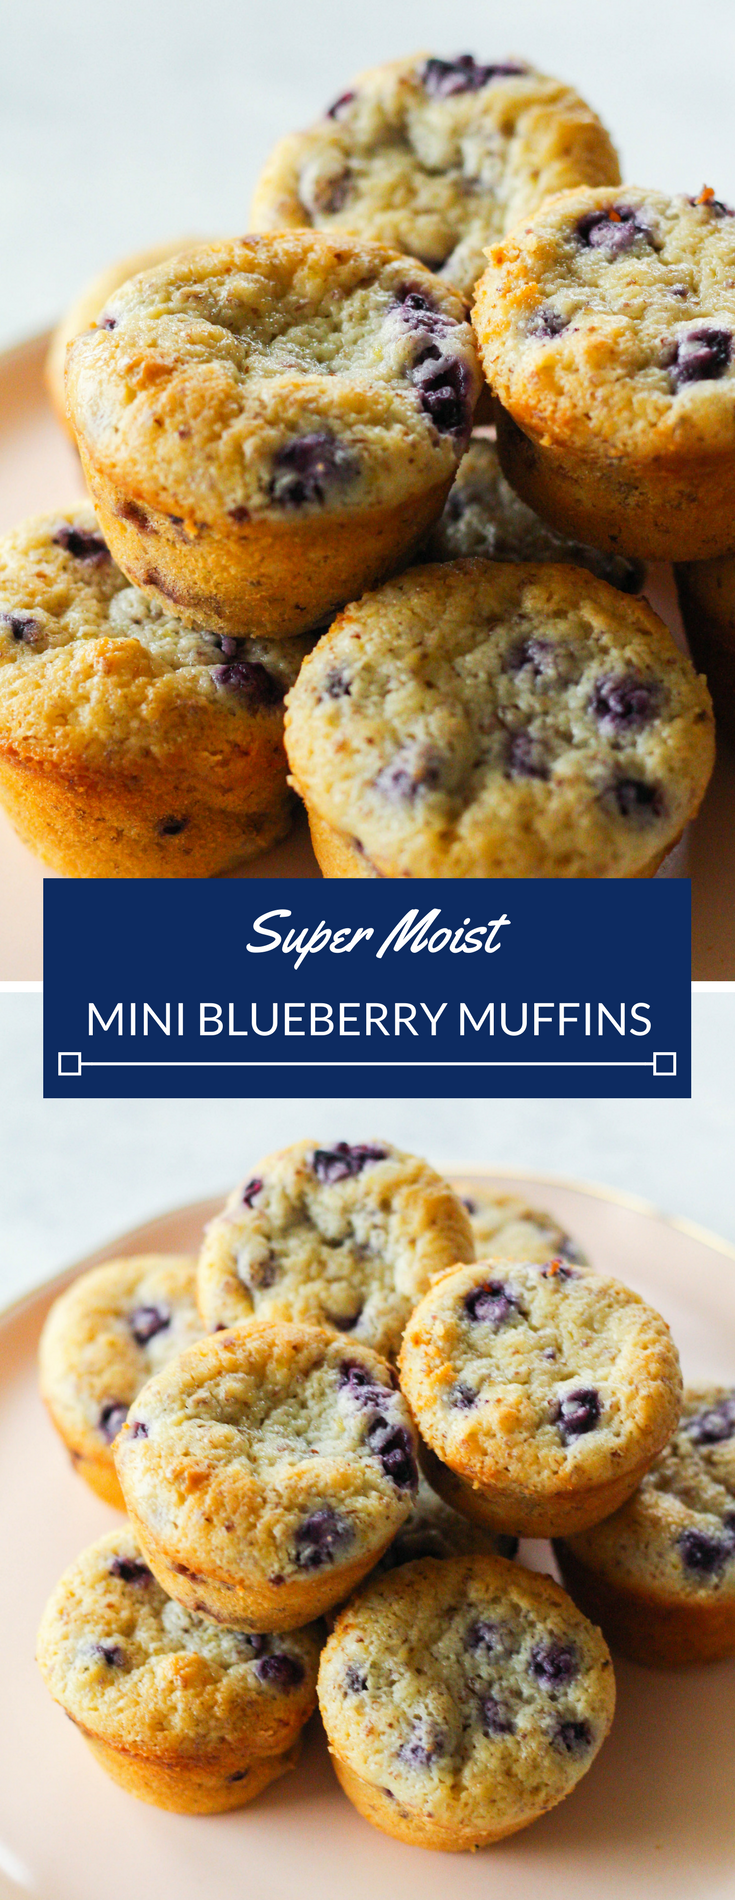 Super moist and soft, these mini blueberry muffins are a delicious treat! Enjoy them for breakfast, a snack or even dessert topped with vanilla ice cream.